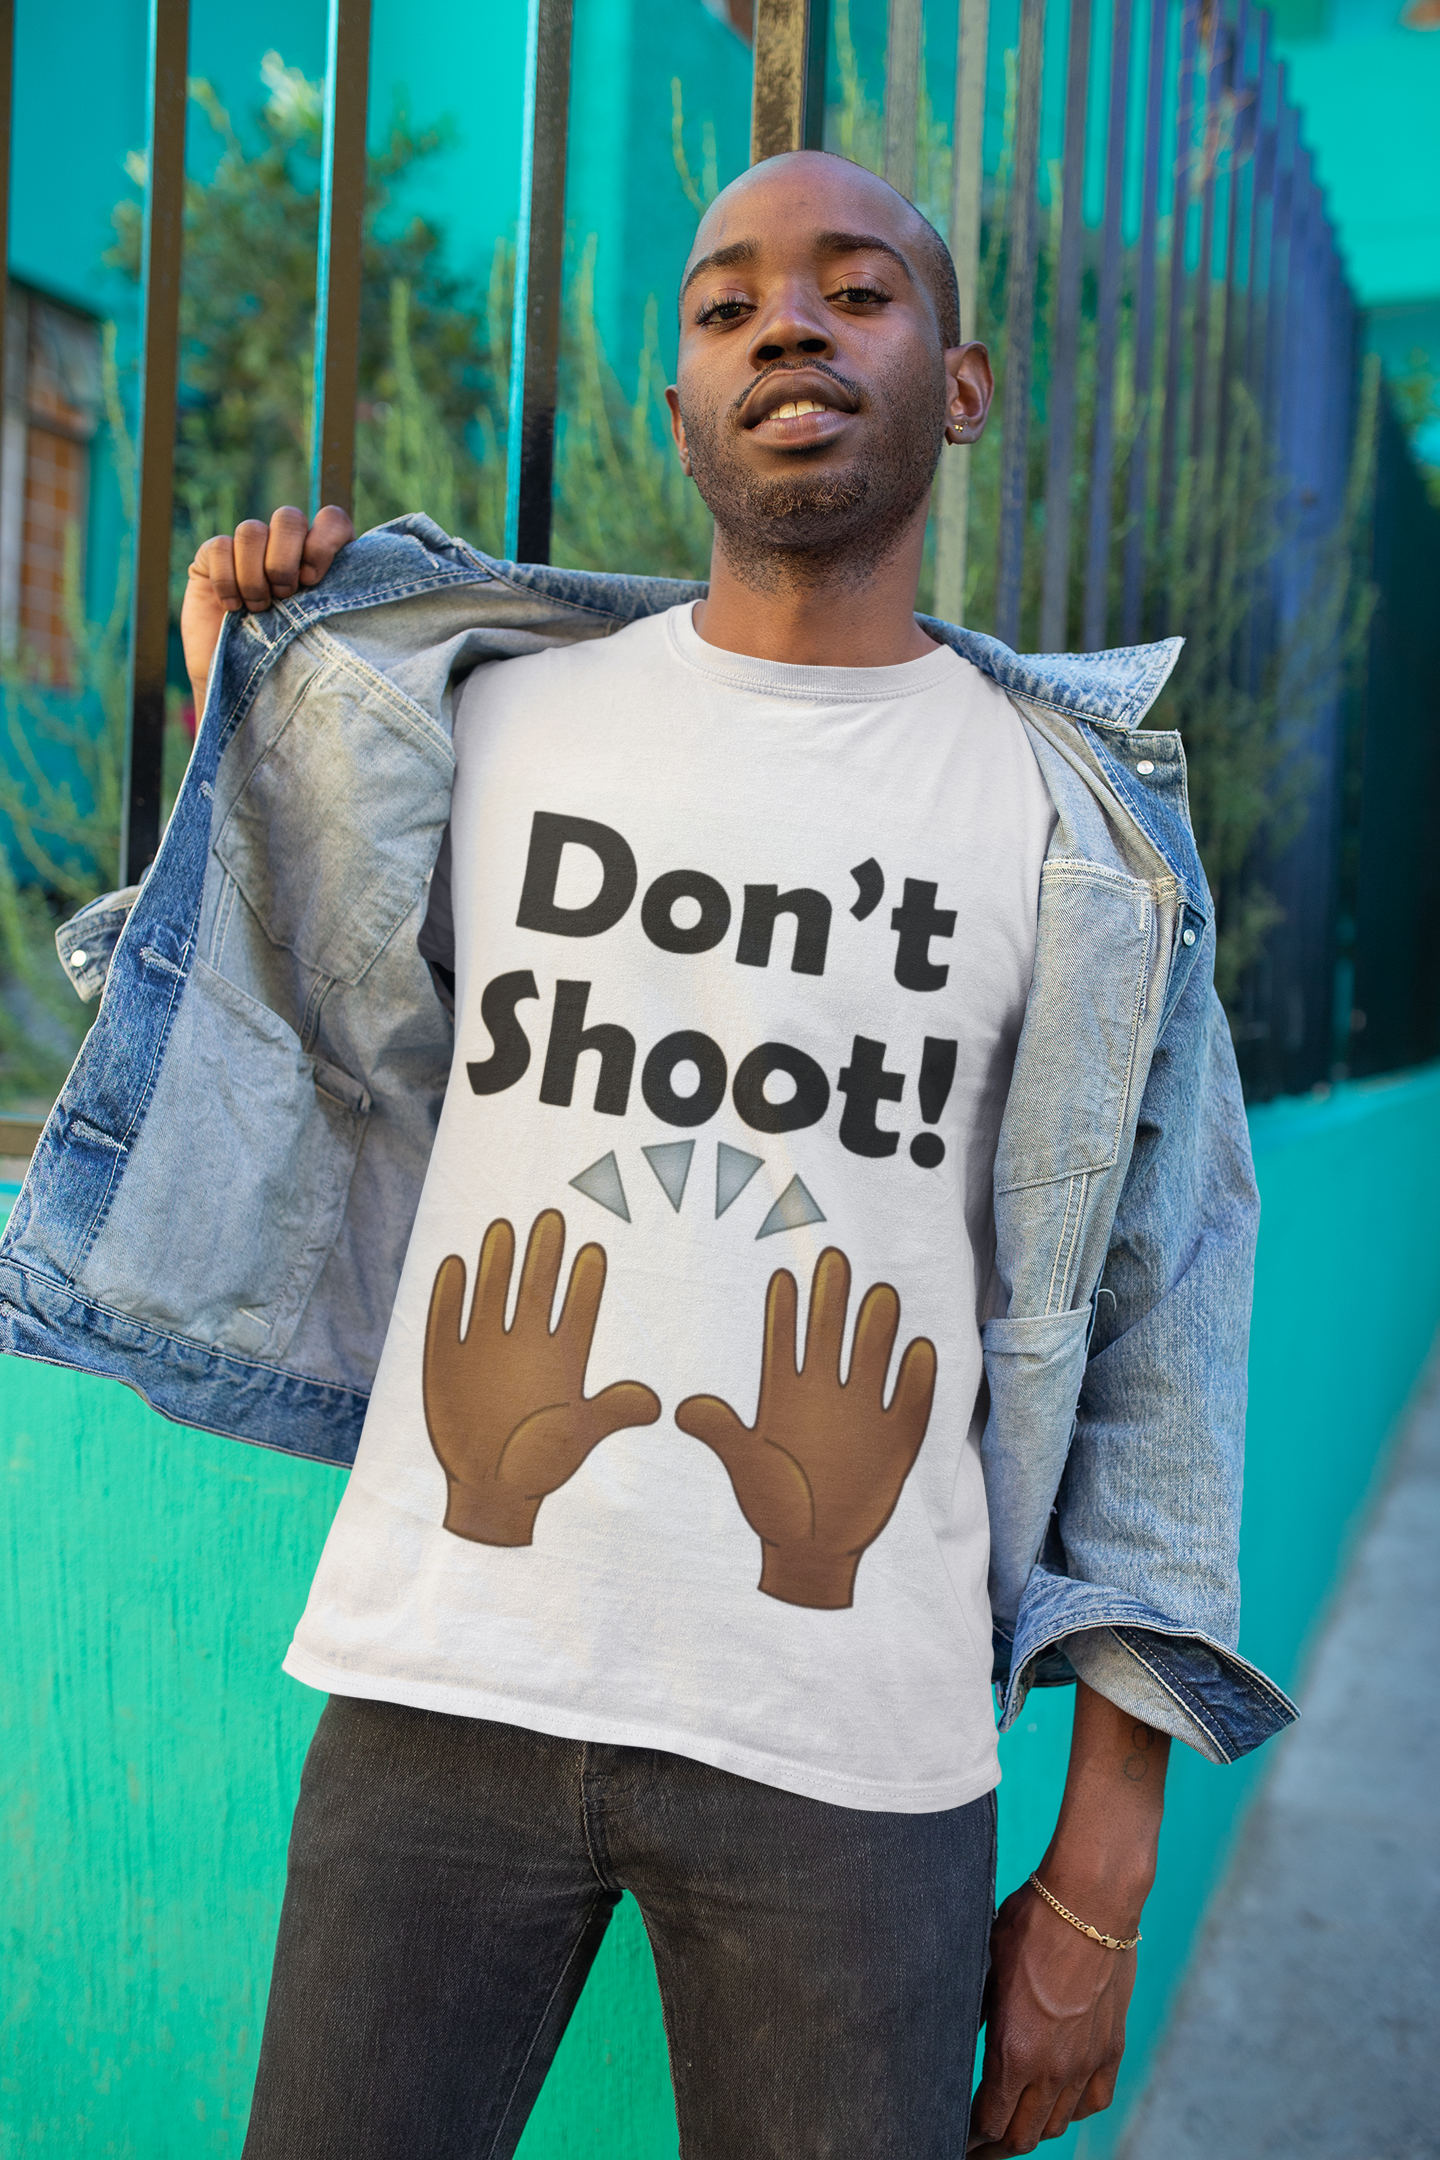 "Don't Shoot" Unisex T-Shirt (Available in White or Stone Gray)